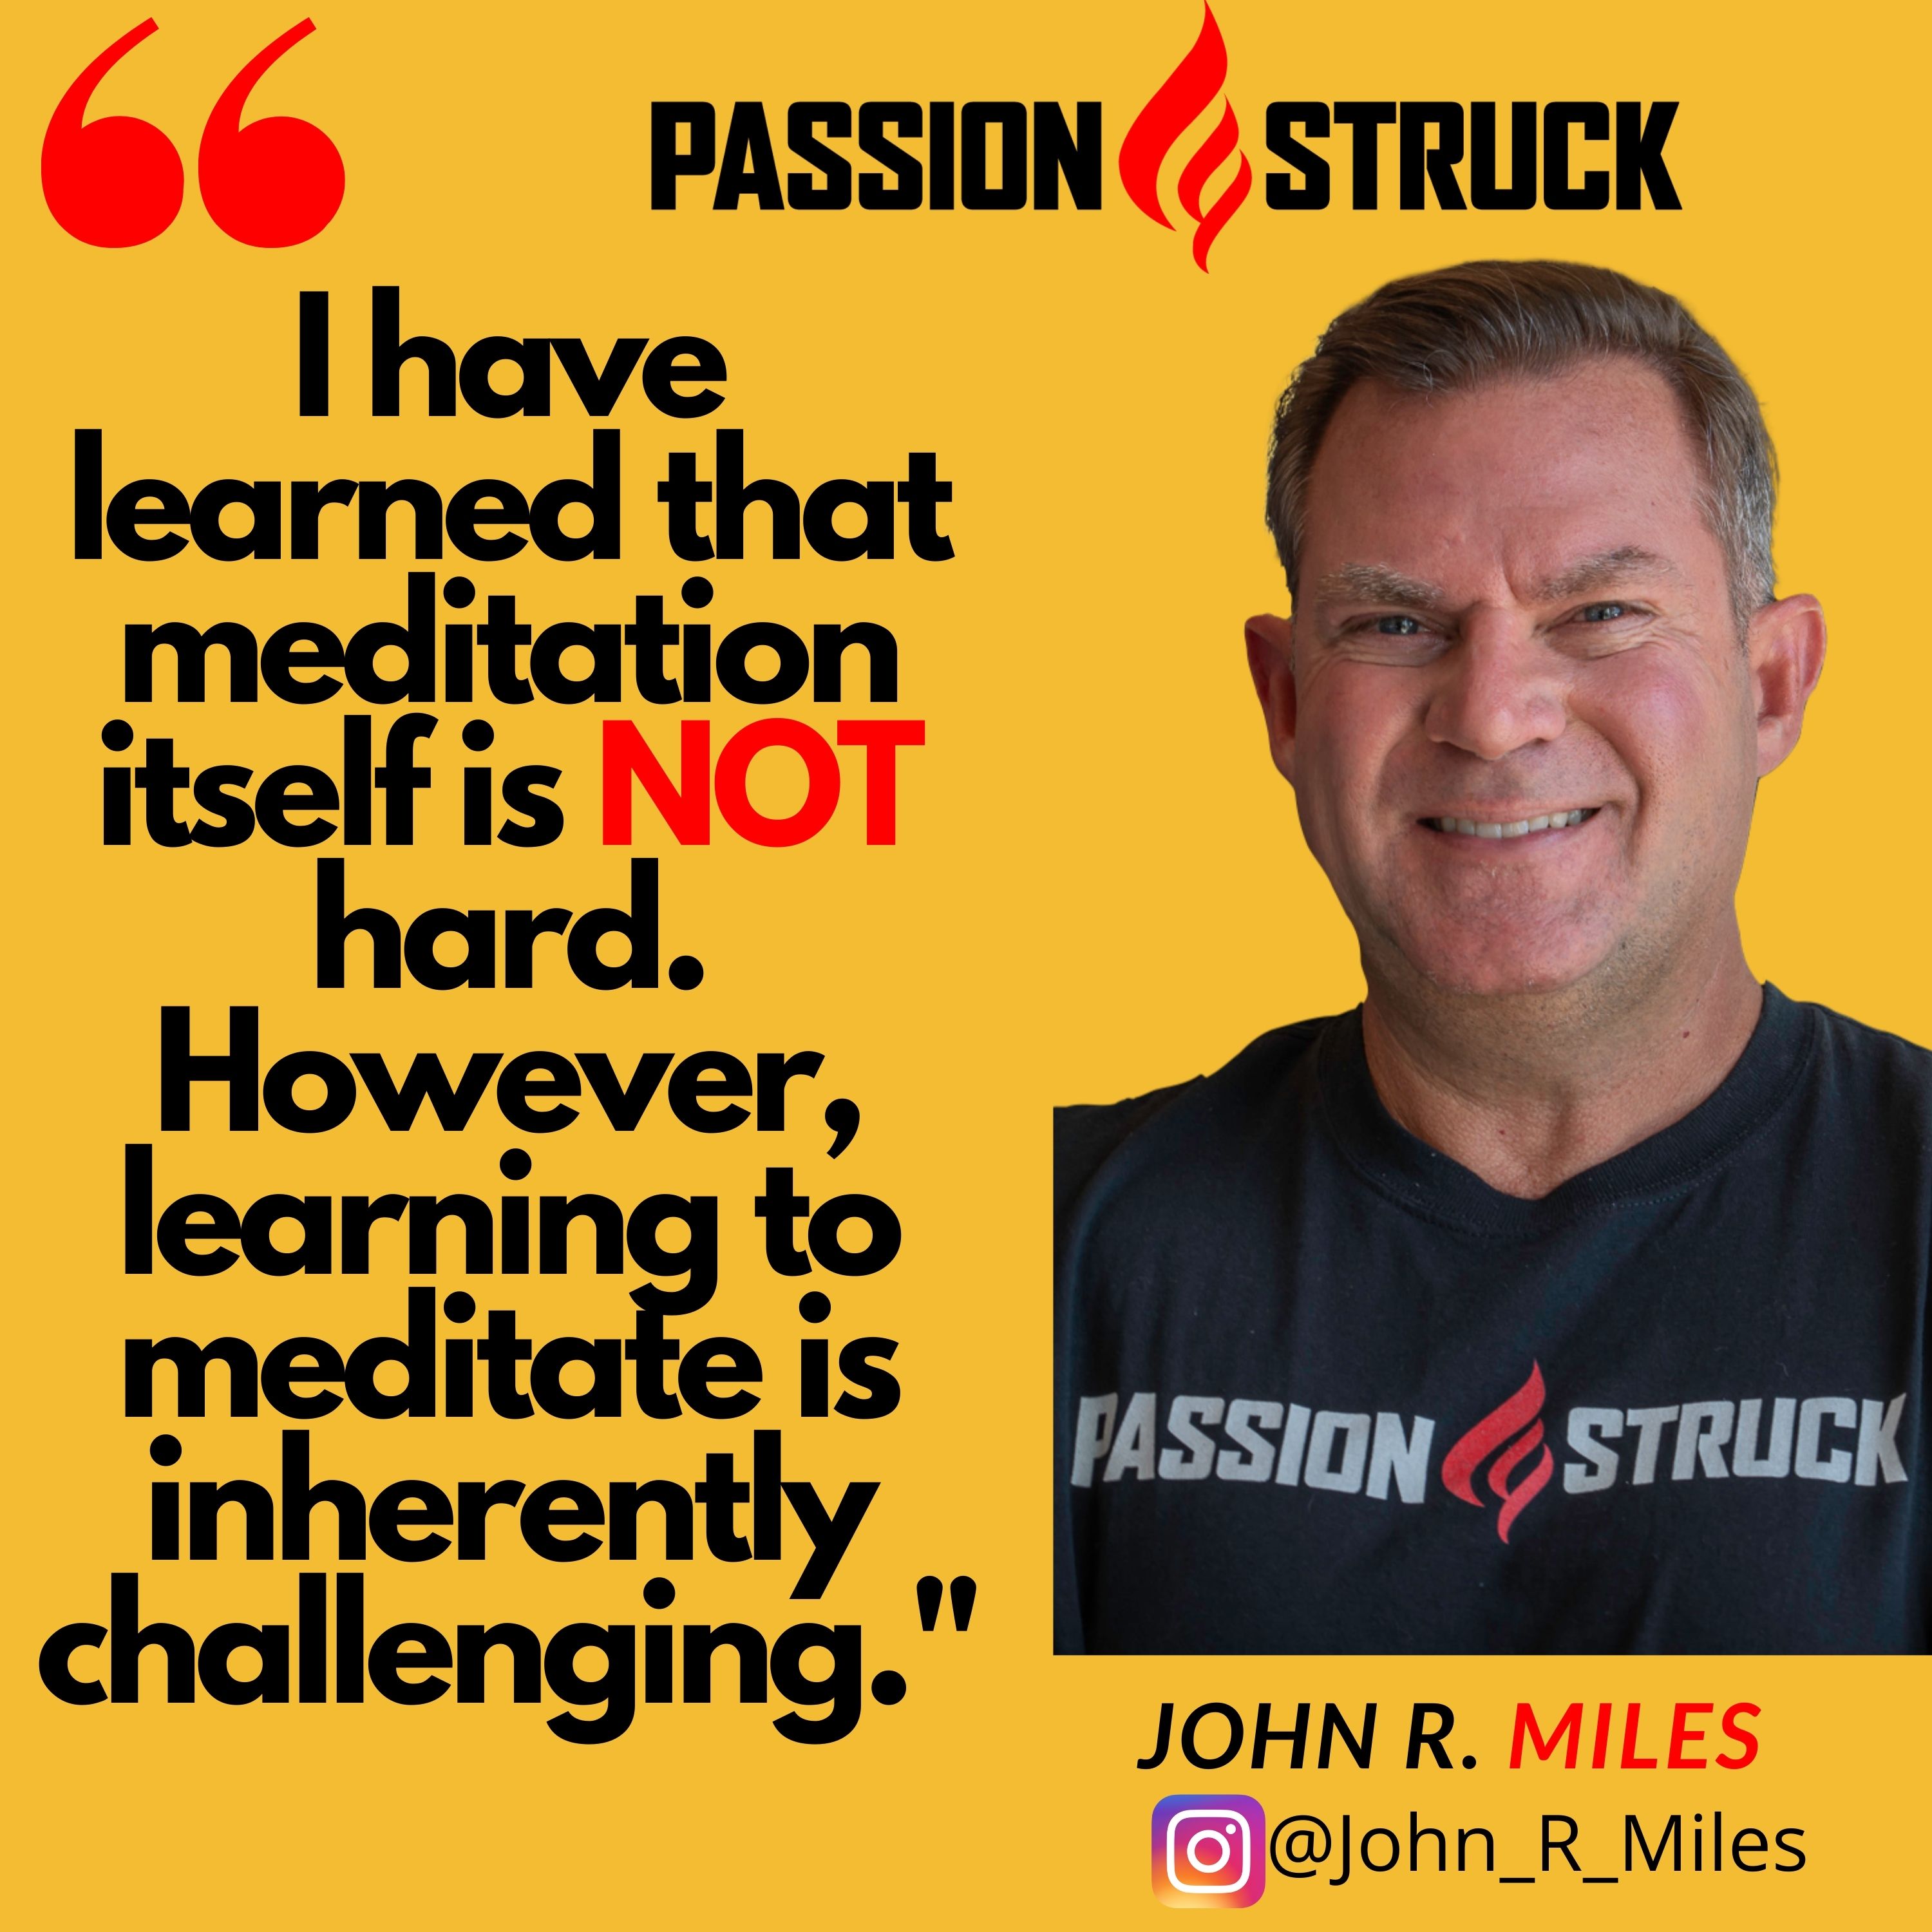 John R. Miles quote "I have learned that meditation itself is NOT hard. However, learning to meditate is inherently challenging."